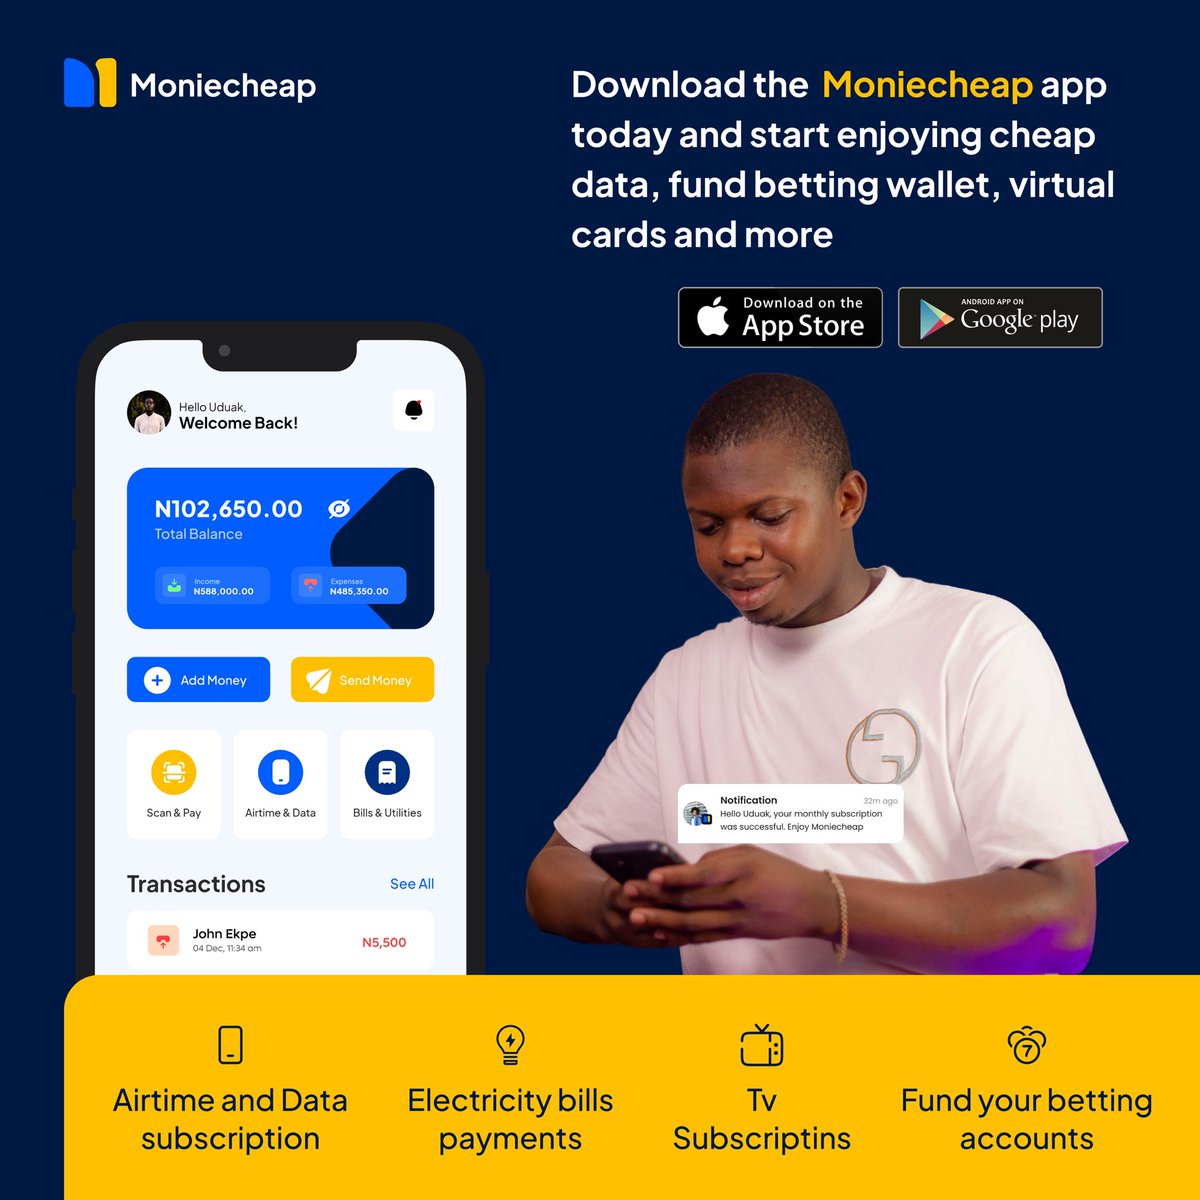 Just got 4GB for NGN 570 from @moniecheap! Moniecheap operates just like free Facebook without using data and allows you to pay for utility bills hassle-free. Plus, the first 200 users to pay for a utility service will receive NGN 10,000.00 in their wallet immediately. To get